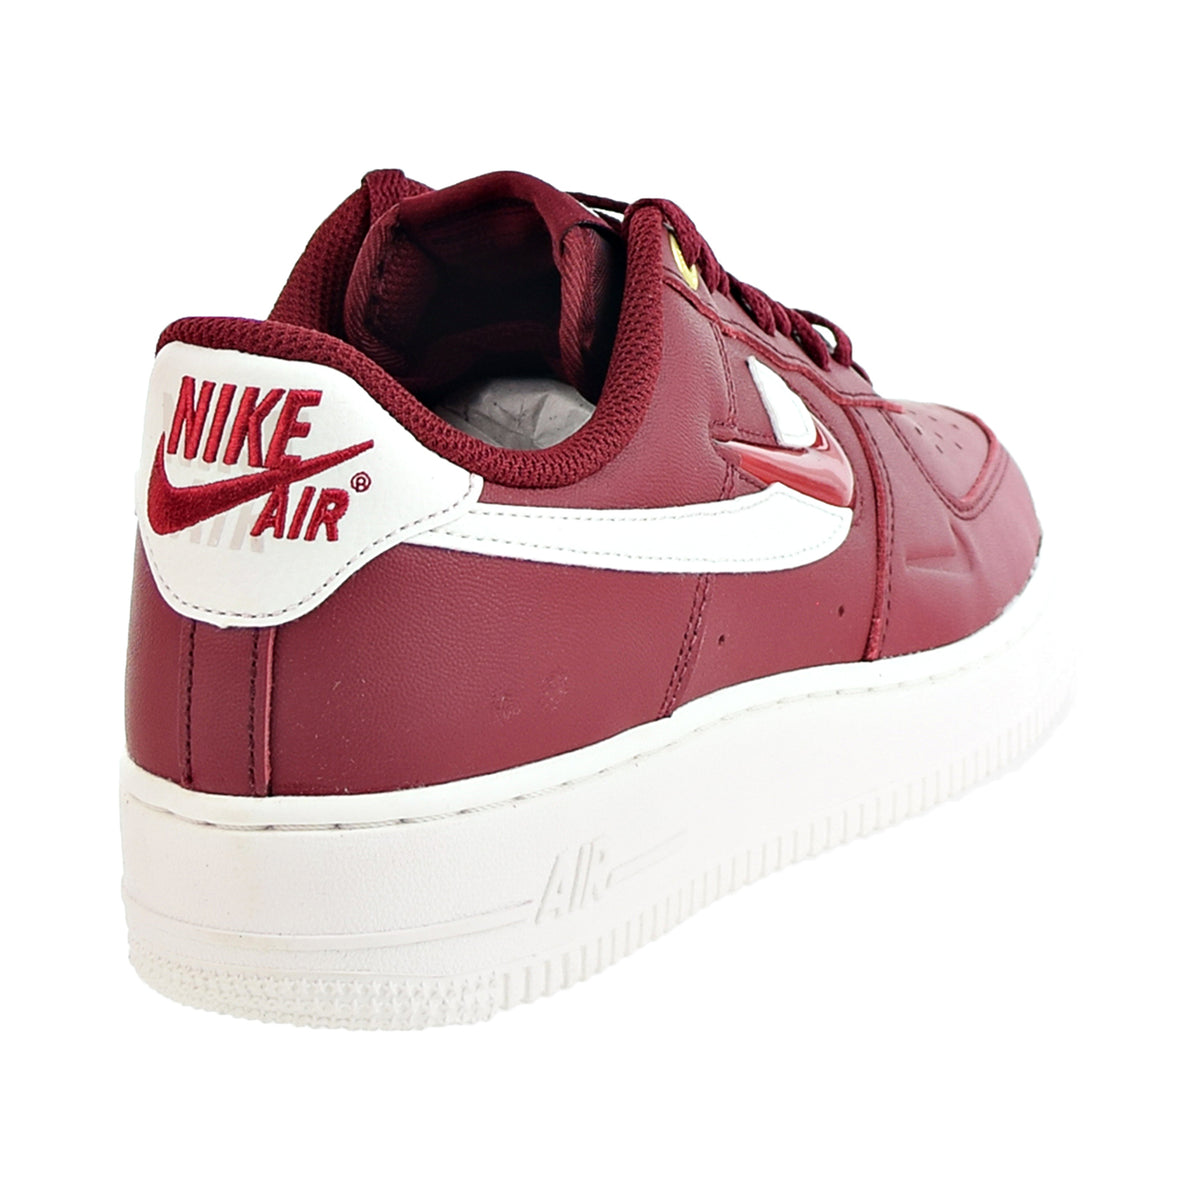 Nike Air Force 1 Low White Team Red for Sale, Authenticity Guaranteed